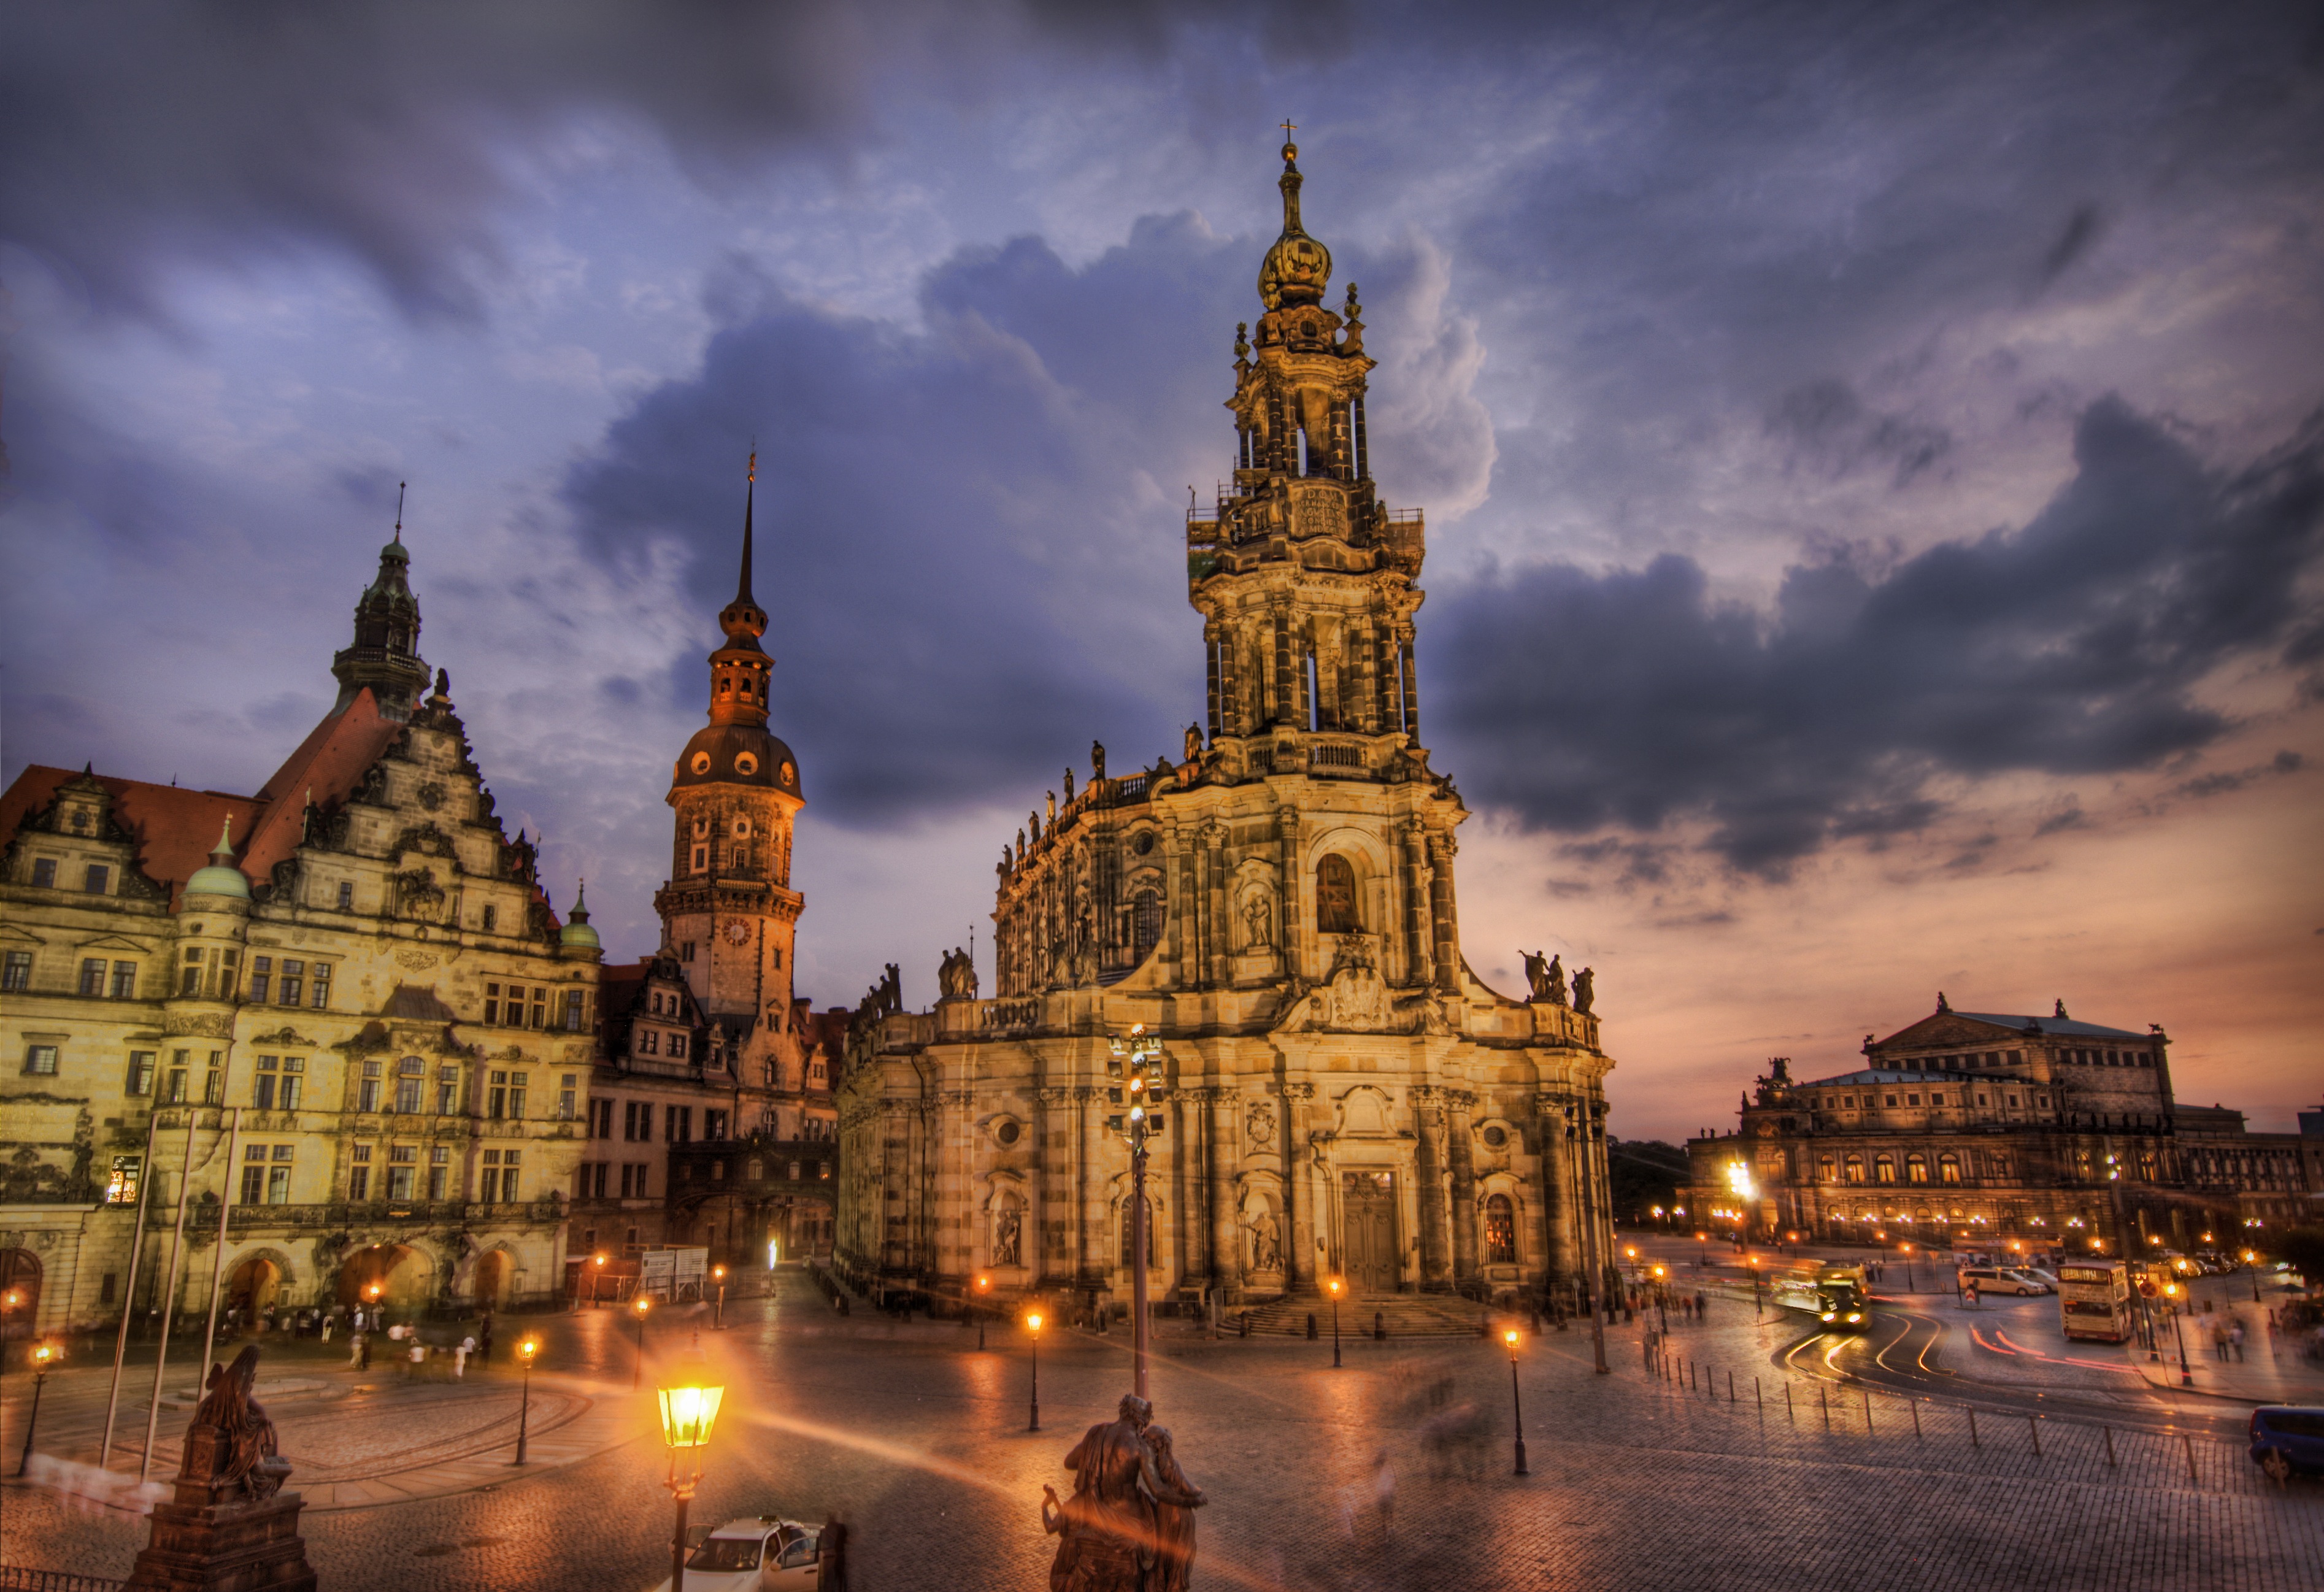 religious, cathedral, architecture, building, dresden, dusk, germany, light, night, square, cathedrals